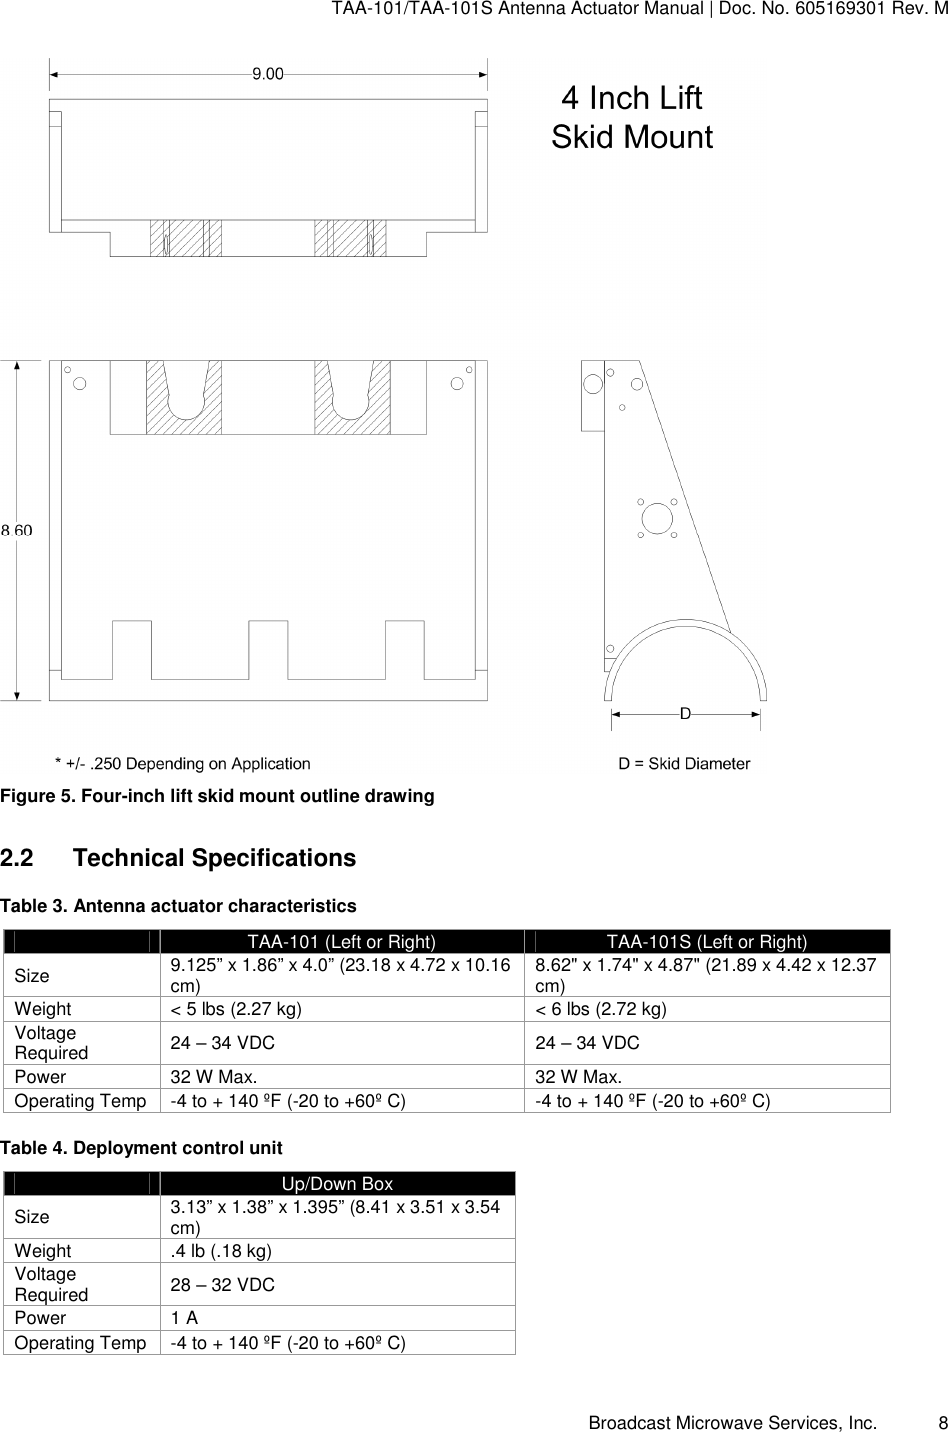 TAA-101/TAA-101S Antenna Actuator Manual | Doc. No. 605169301 Rev. M Broadcast Microwave Services, Inc.      8  Figure 5. Four-inch lift skid mount outline drawing 2.2  Technical Specifications Table 3. Antenna actuator characteristics   TAA-101 (Left or Right)  TAA-101S (Left or Right) Size  9.125” x 1.86” x 4.0” (23.18 x 4.72 x 10.16 cm) 8.62&quot; x 1.74&quot; x 4.87&quot; (21.89 x 4.42 x 12.37 cm) Weight  &lt; 5 lbs (2.27 kg)  &lt; 6 lbs (2.72 kg) Voltage Required  24 – 34 VDC  24 – 34 VDC Power  32 W Max.  32 W Max. Operating Temp  -4 to + 140 ºF (-20 to +60º C)  -4 to + 140 ºF (-20 to +60º C) Table 4. Deployment control unit   Up/Down Box Size  3.13” x 1.38” x 1.395” (8.41 x 3.51 x 3.54 cm) Weight  .4 lb (.18 kg) Voltage Required 28 – 32 VDC Power  1 A Operating Temp  -4 to + 140 ºF (-20 to +60º C) 